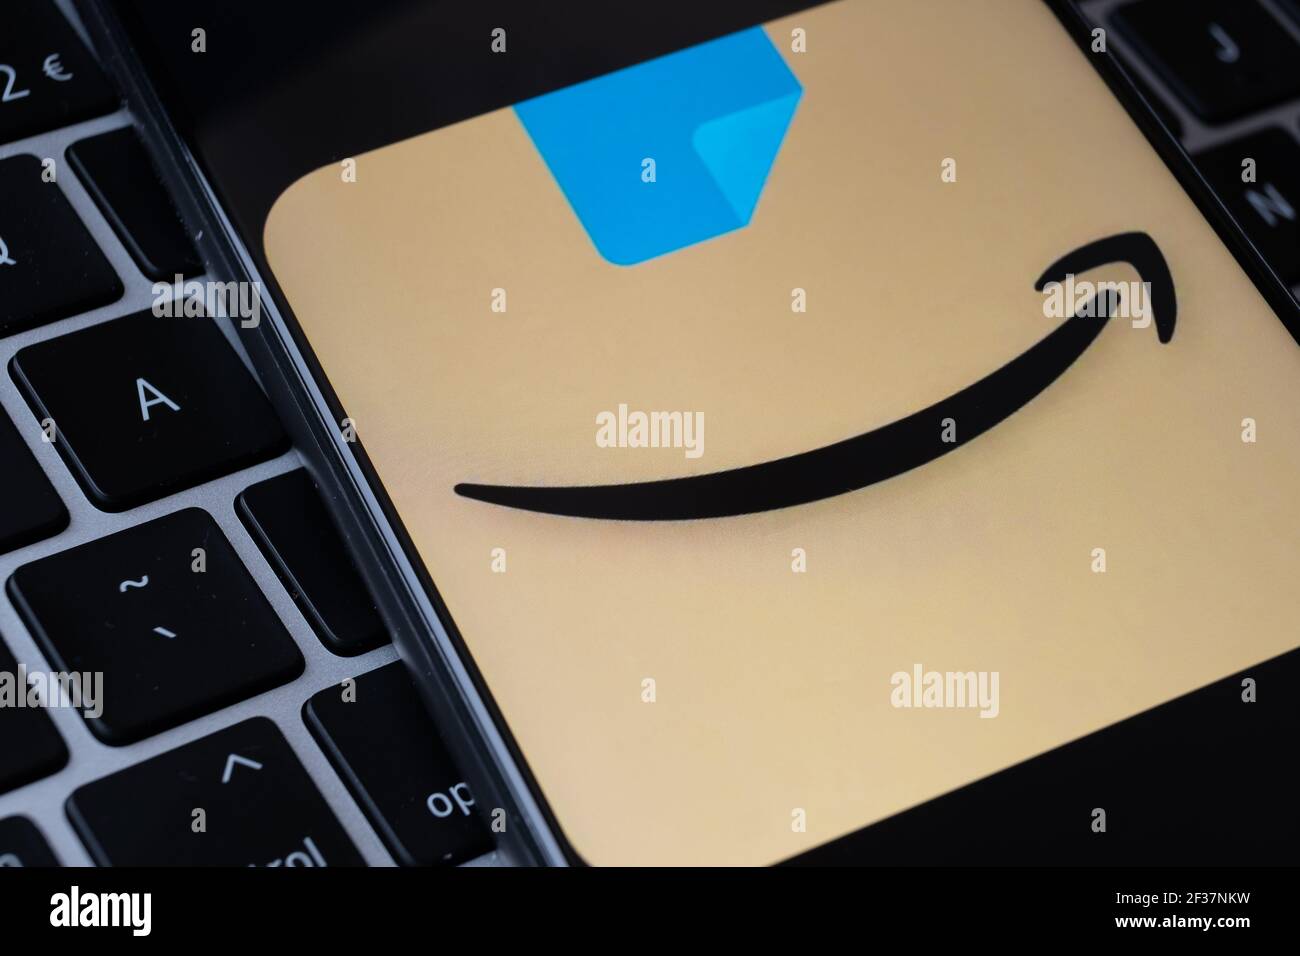 New rebranded amazon shopping app logo seen on the screen of smatphone whigh is placed on the keyboard. Concept for e-commerce and online shopping. St Stock Photo